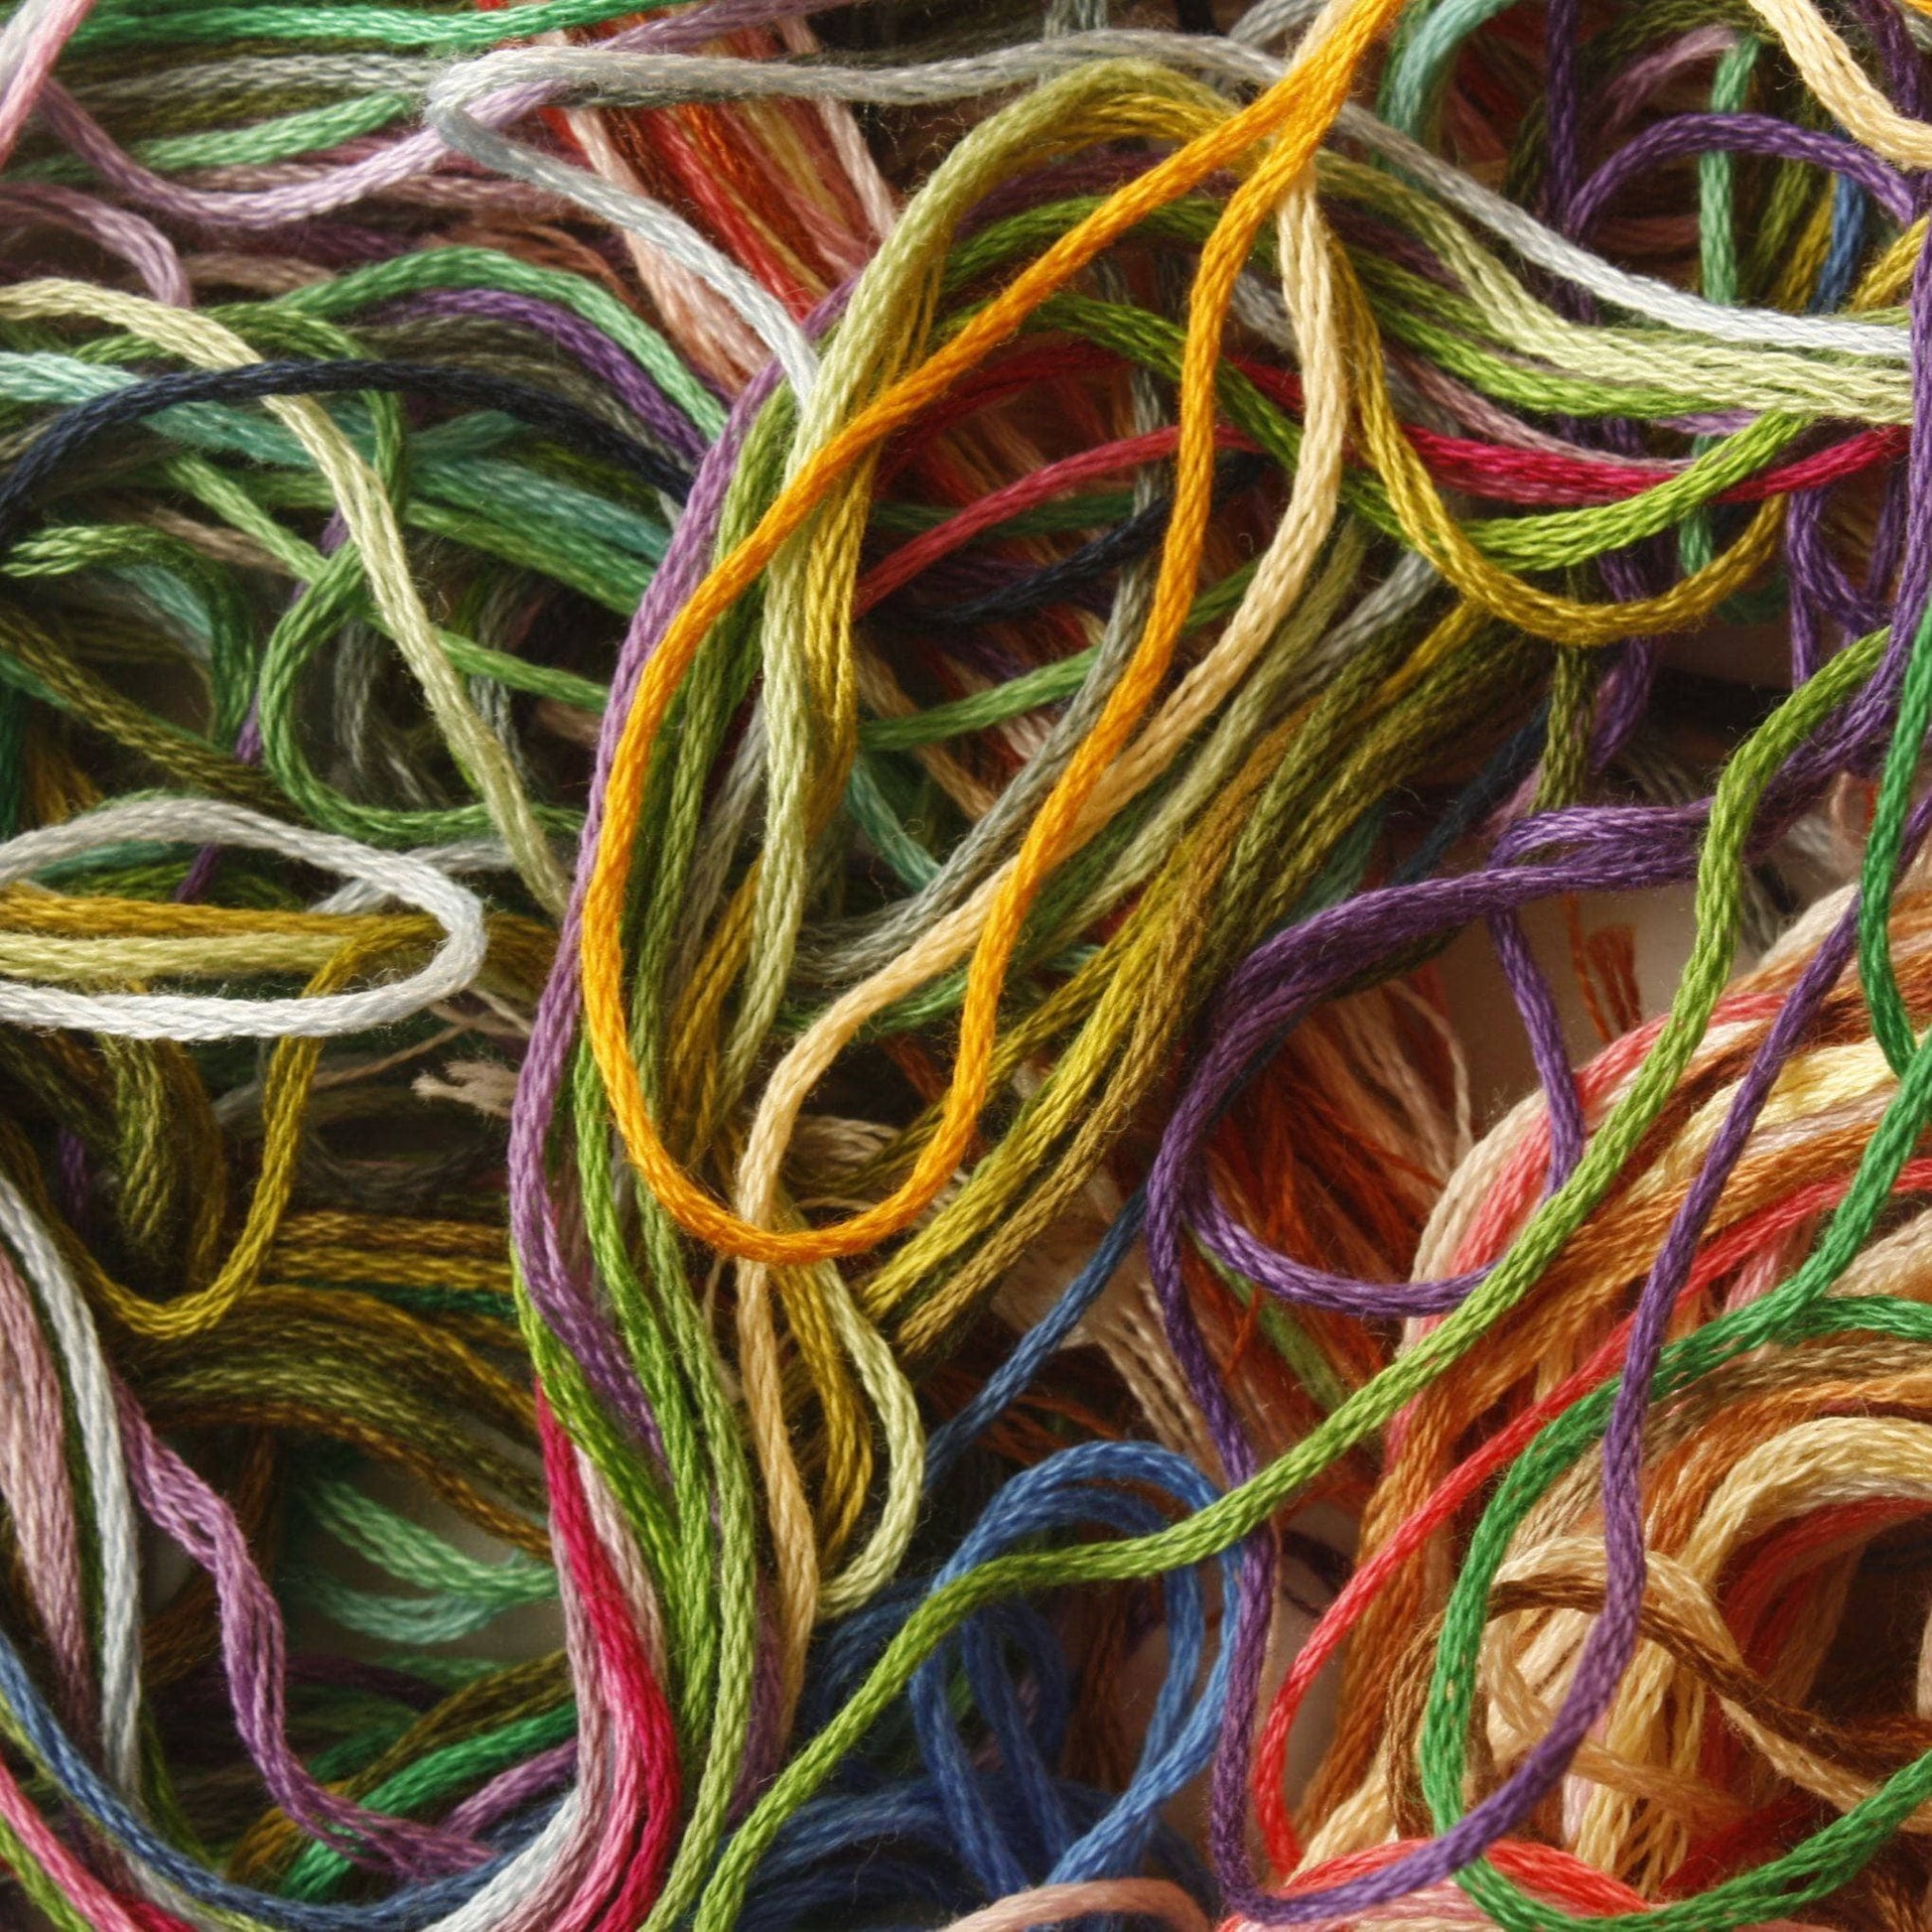 Close up view of assorted colorful yarn threads. Yellow, green, blue, red, pink, peach, magenta, and beige.